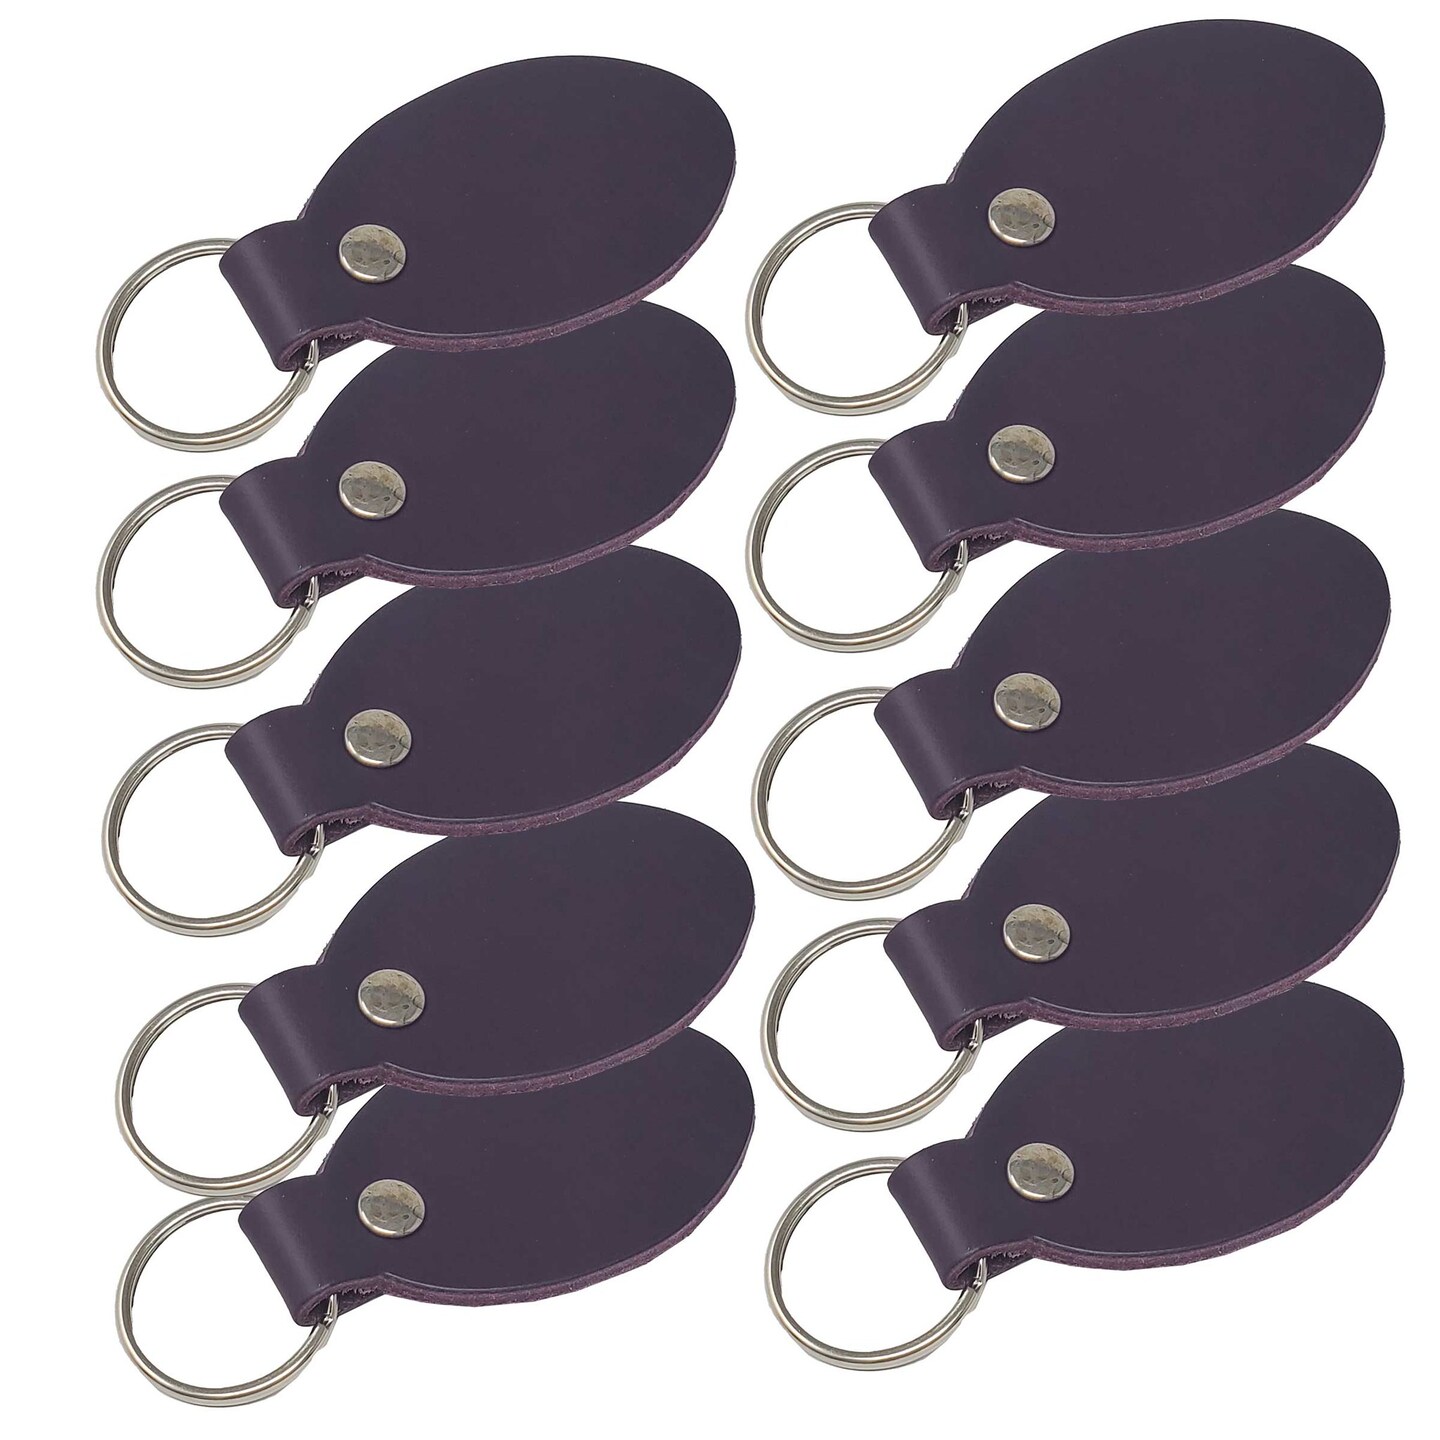 Top 10 Key Chain Manufacturers for Customized Corporate Gifts